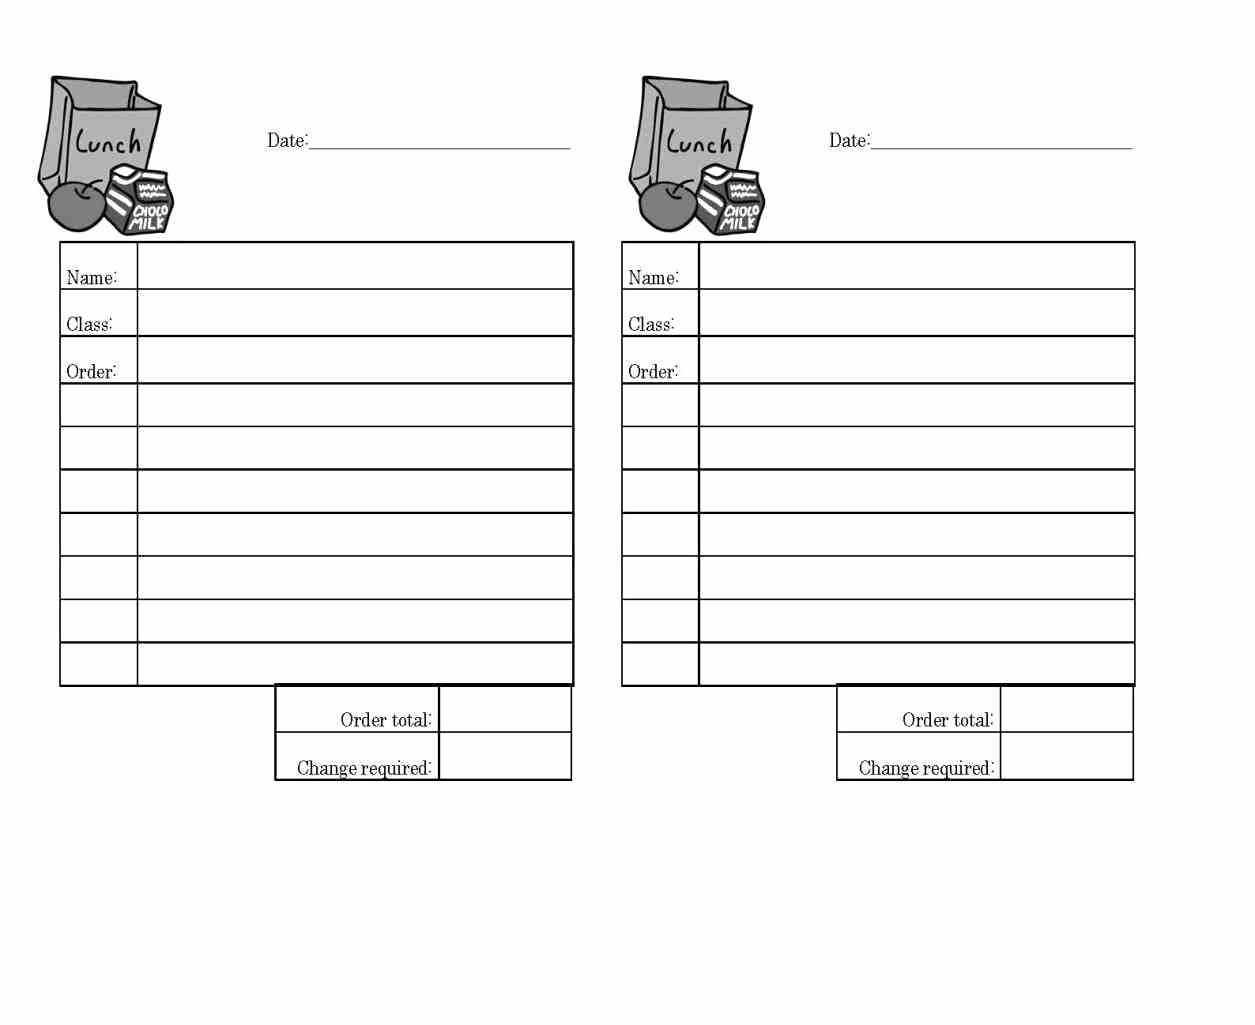 Office Lunch order form Template Best Of Fice Lunch order form Template Image Collections